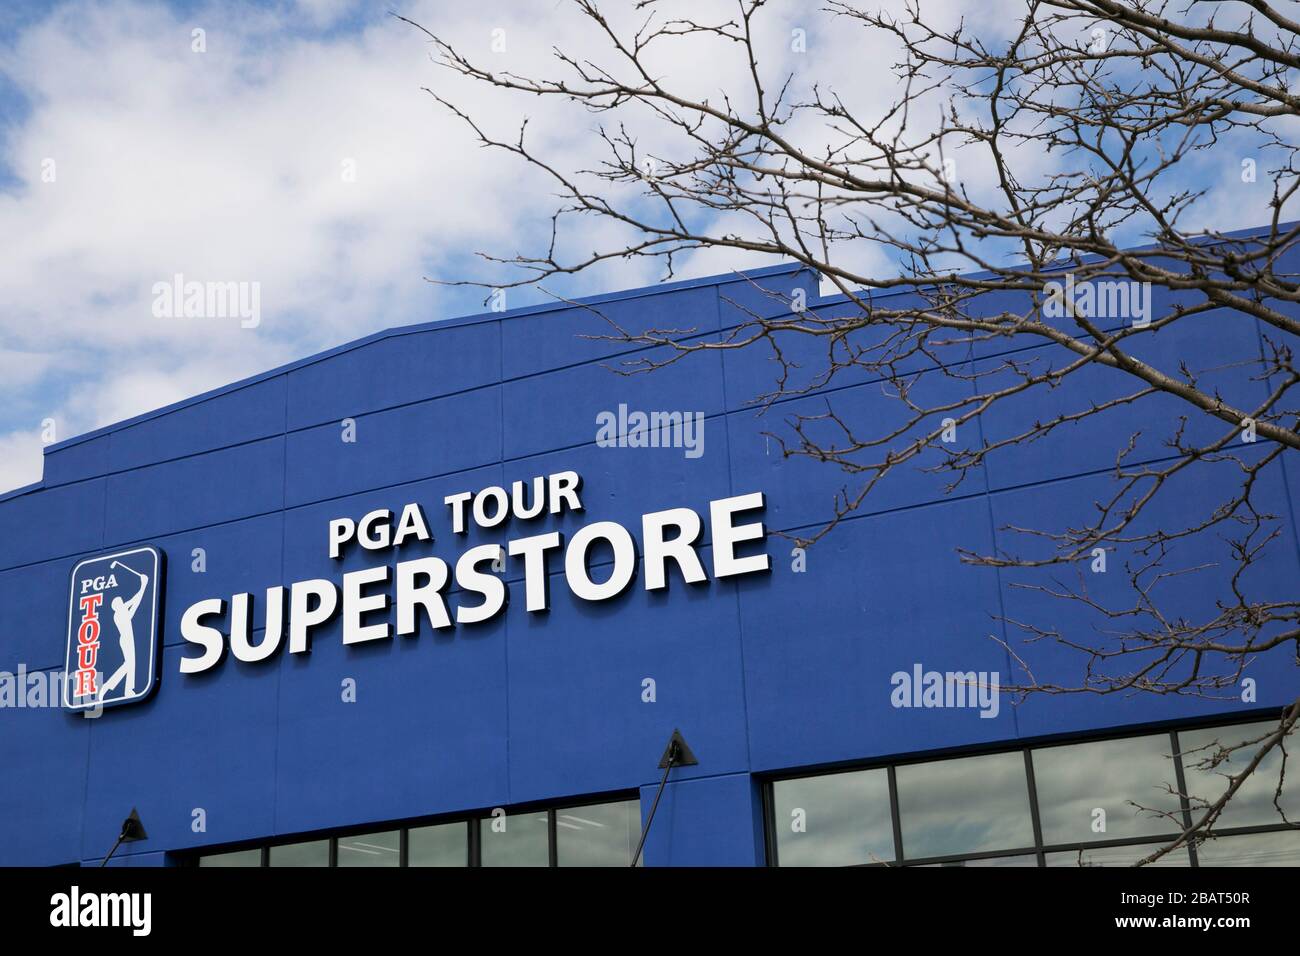 A logo sign outside of a PGA TOUR Superstore retail store location in East Hanover, New Jersey, on March 23, 2020. Stock Photo